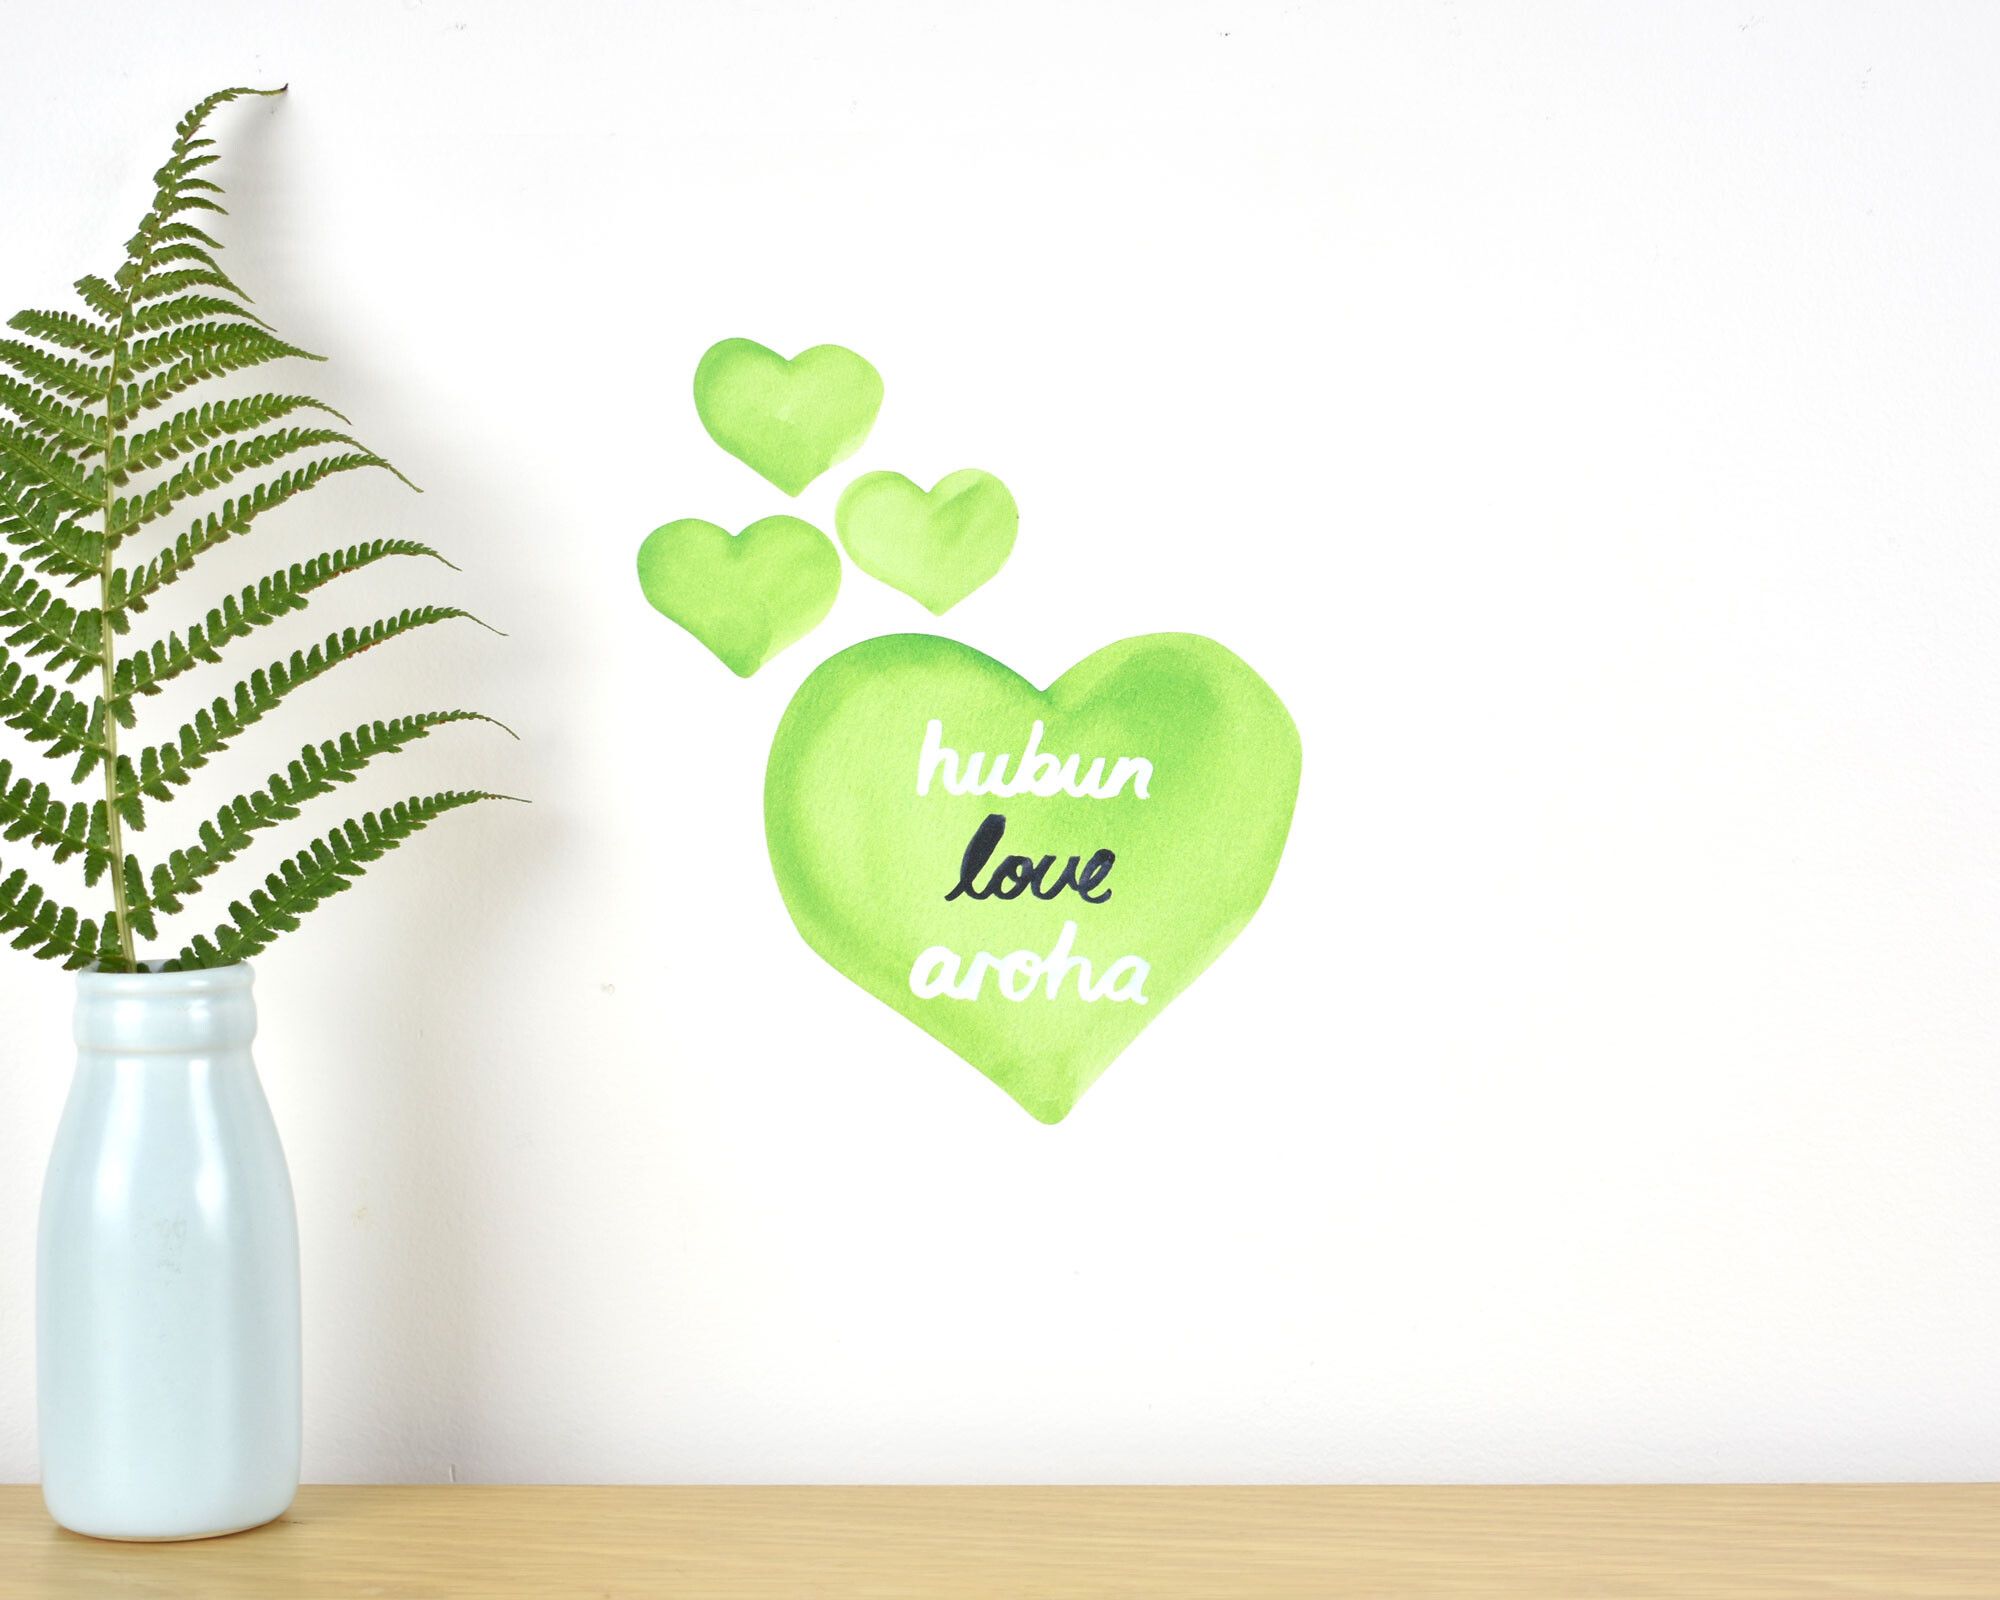 Love wall decal tiny - fundraising for Christchurch mosque attack victims